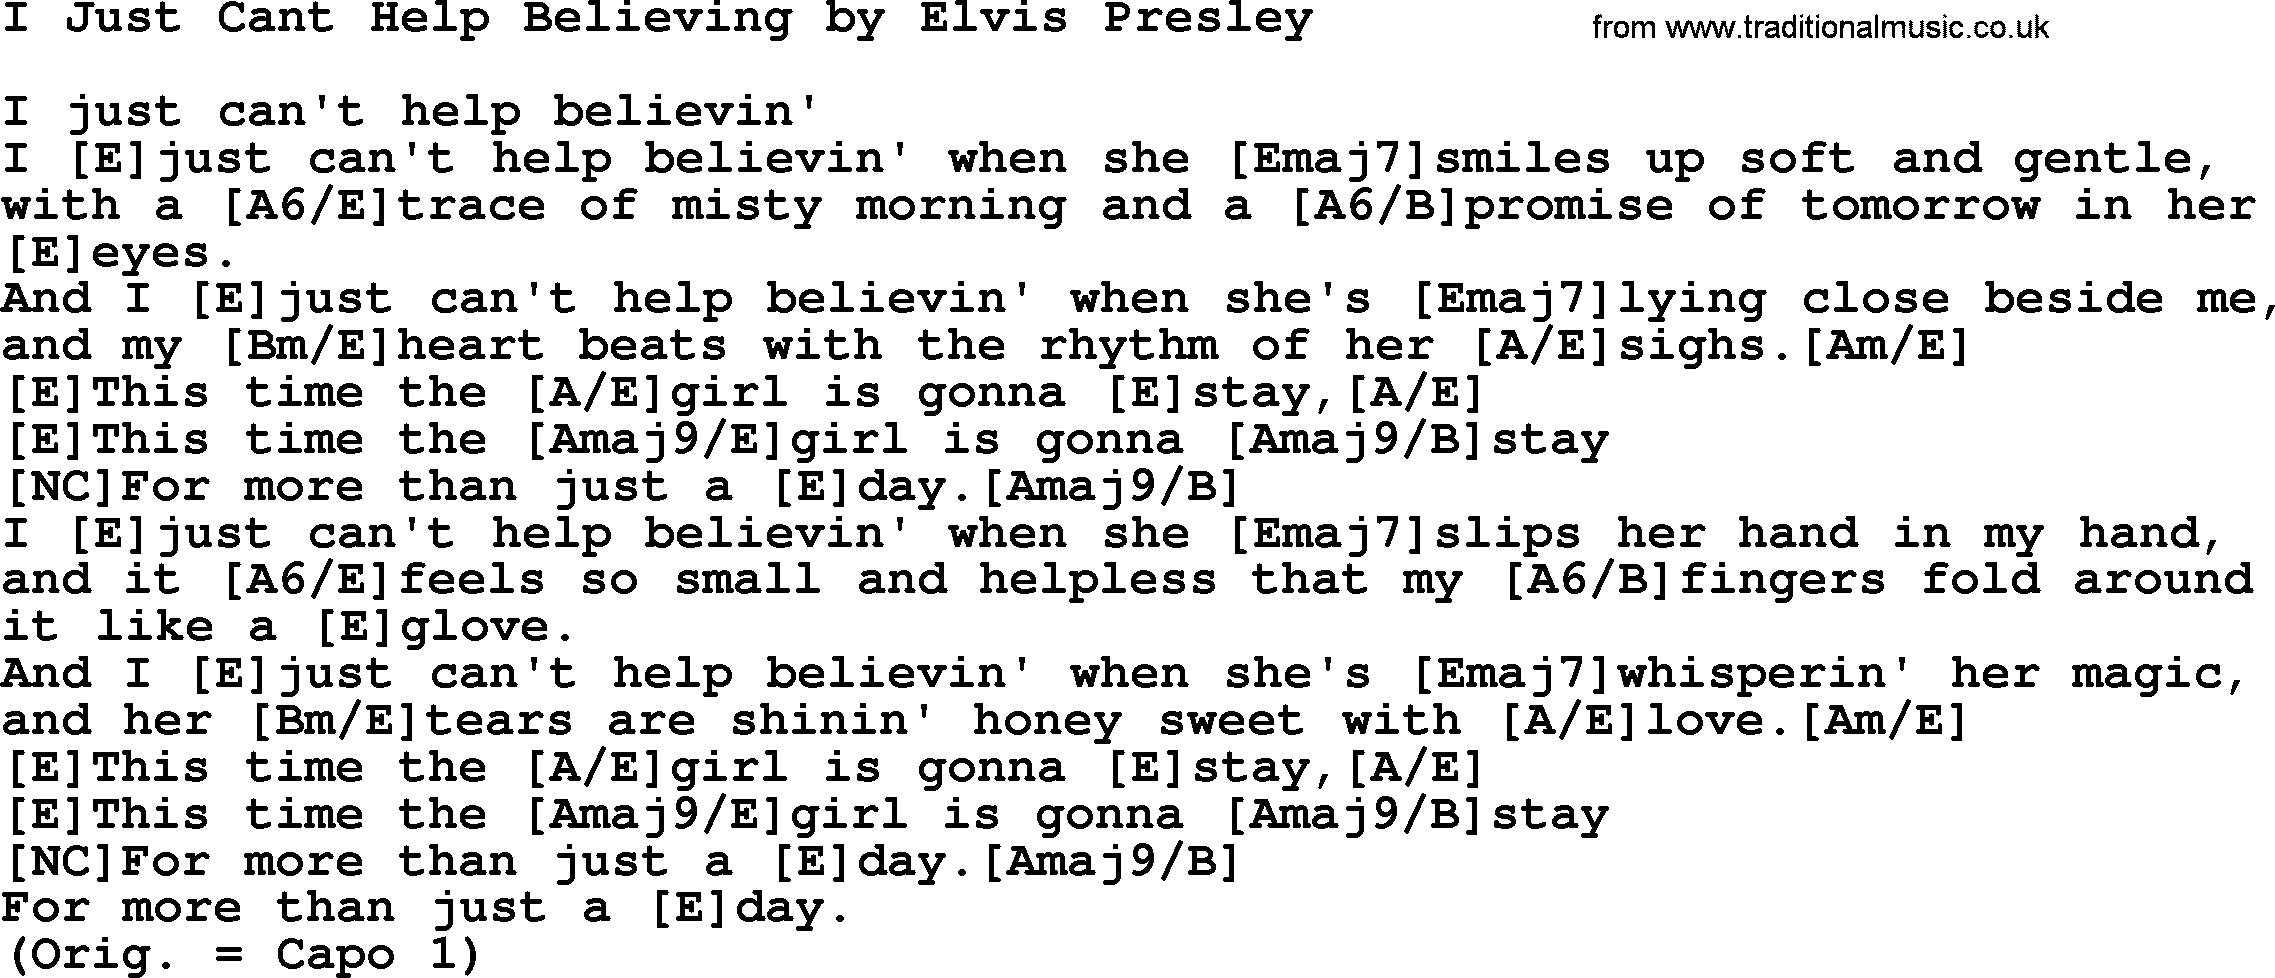 Elvis Presley song: I Just Cant Help Believing, lyrics and chords